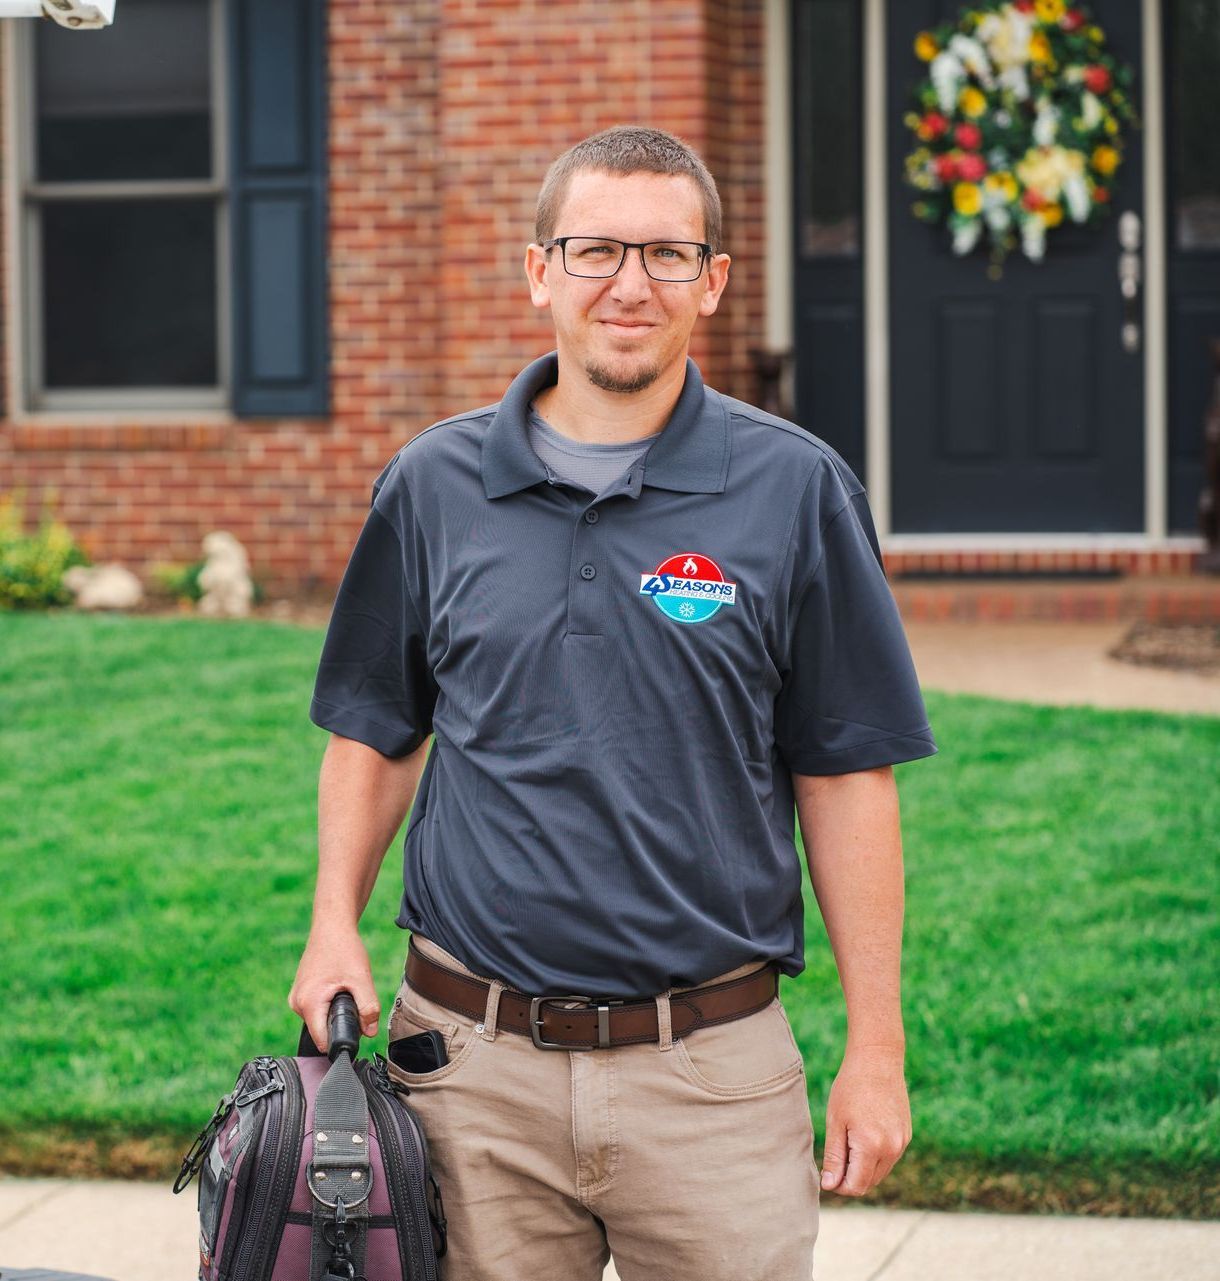 A man is standing in front of a brick house holding a backpack.